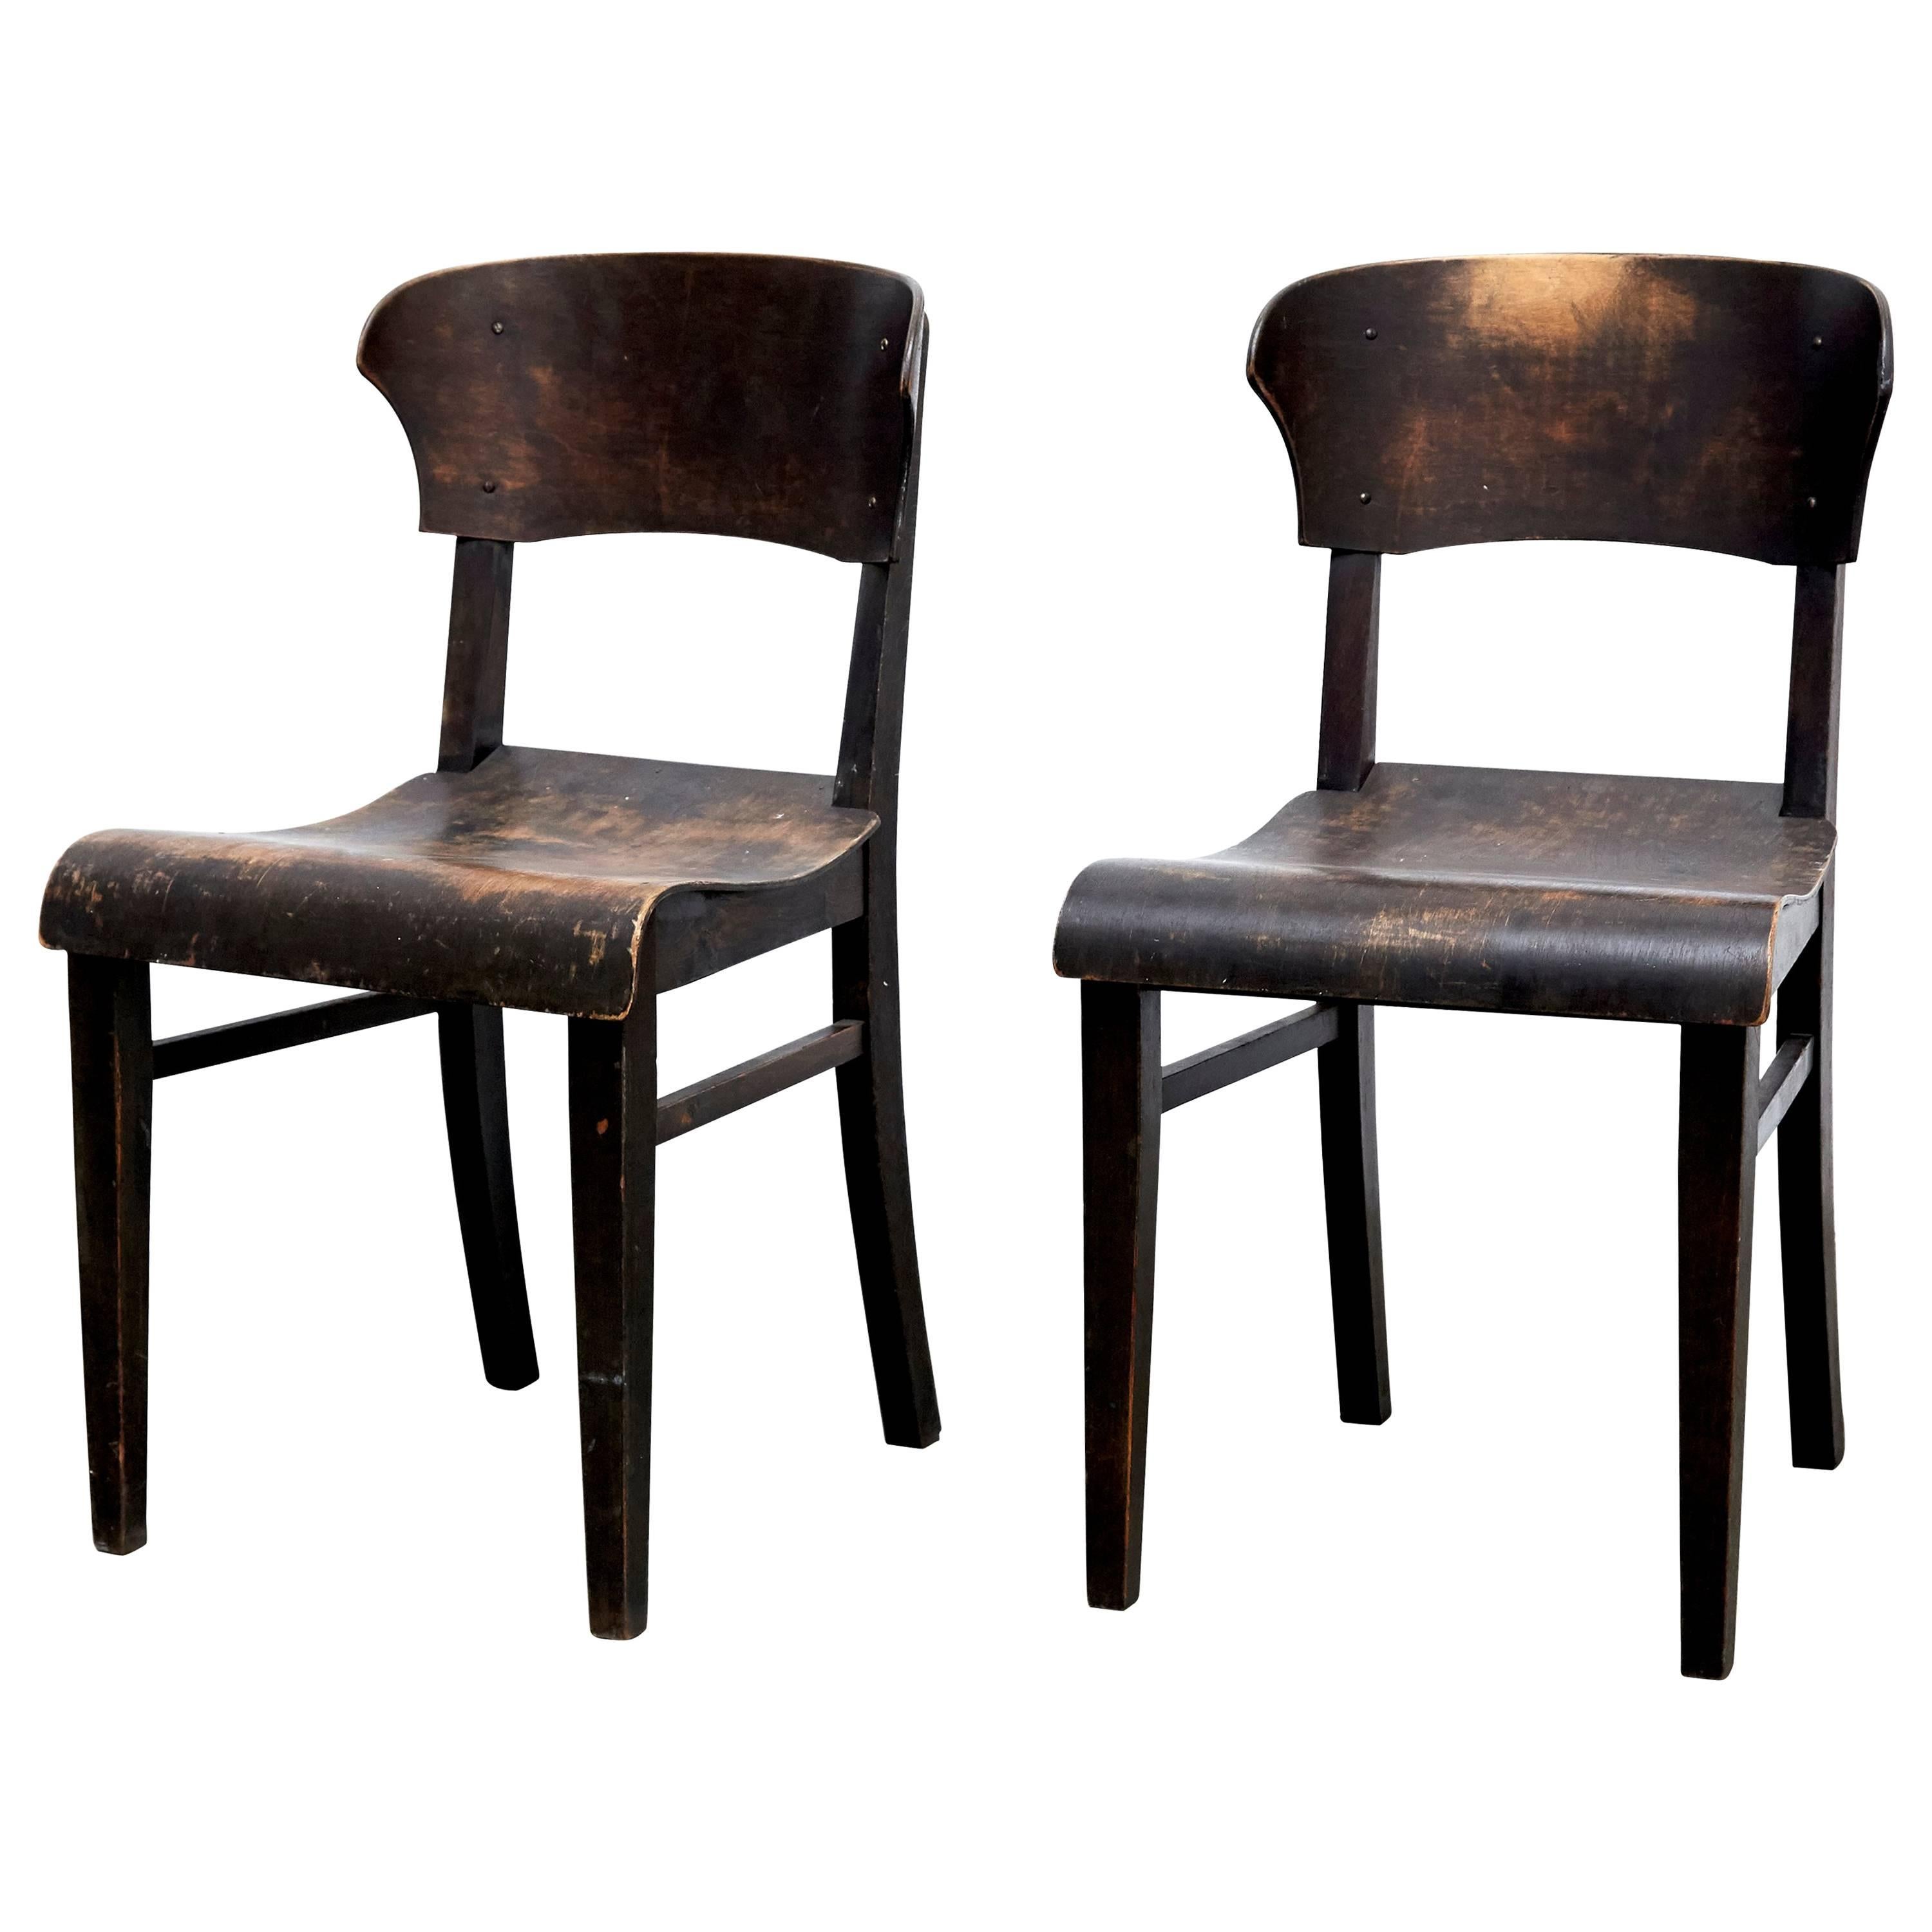 Pair of Chairs in Style of Rockhausen